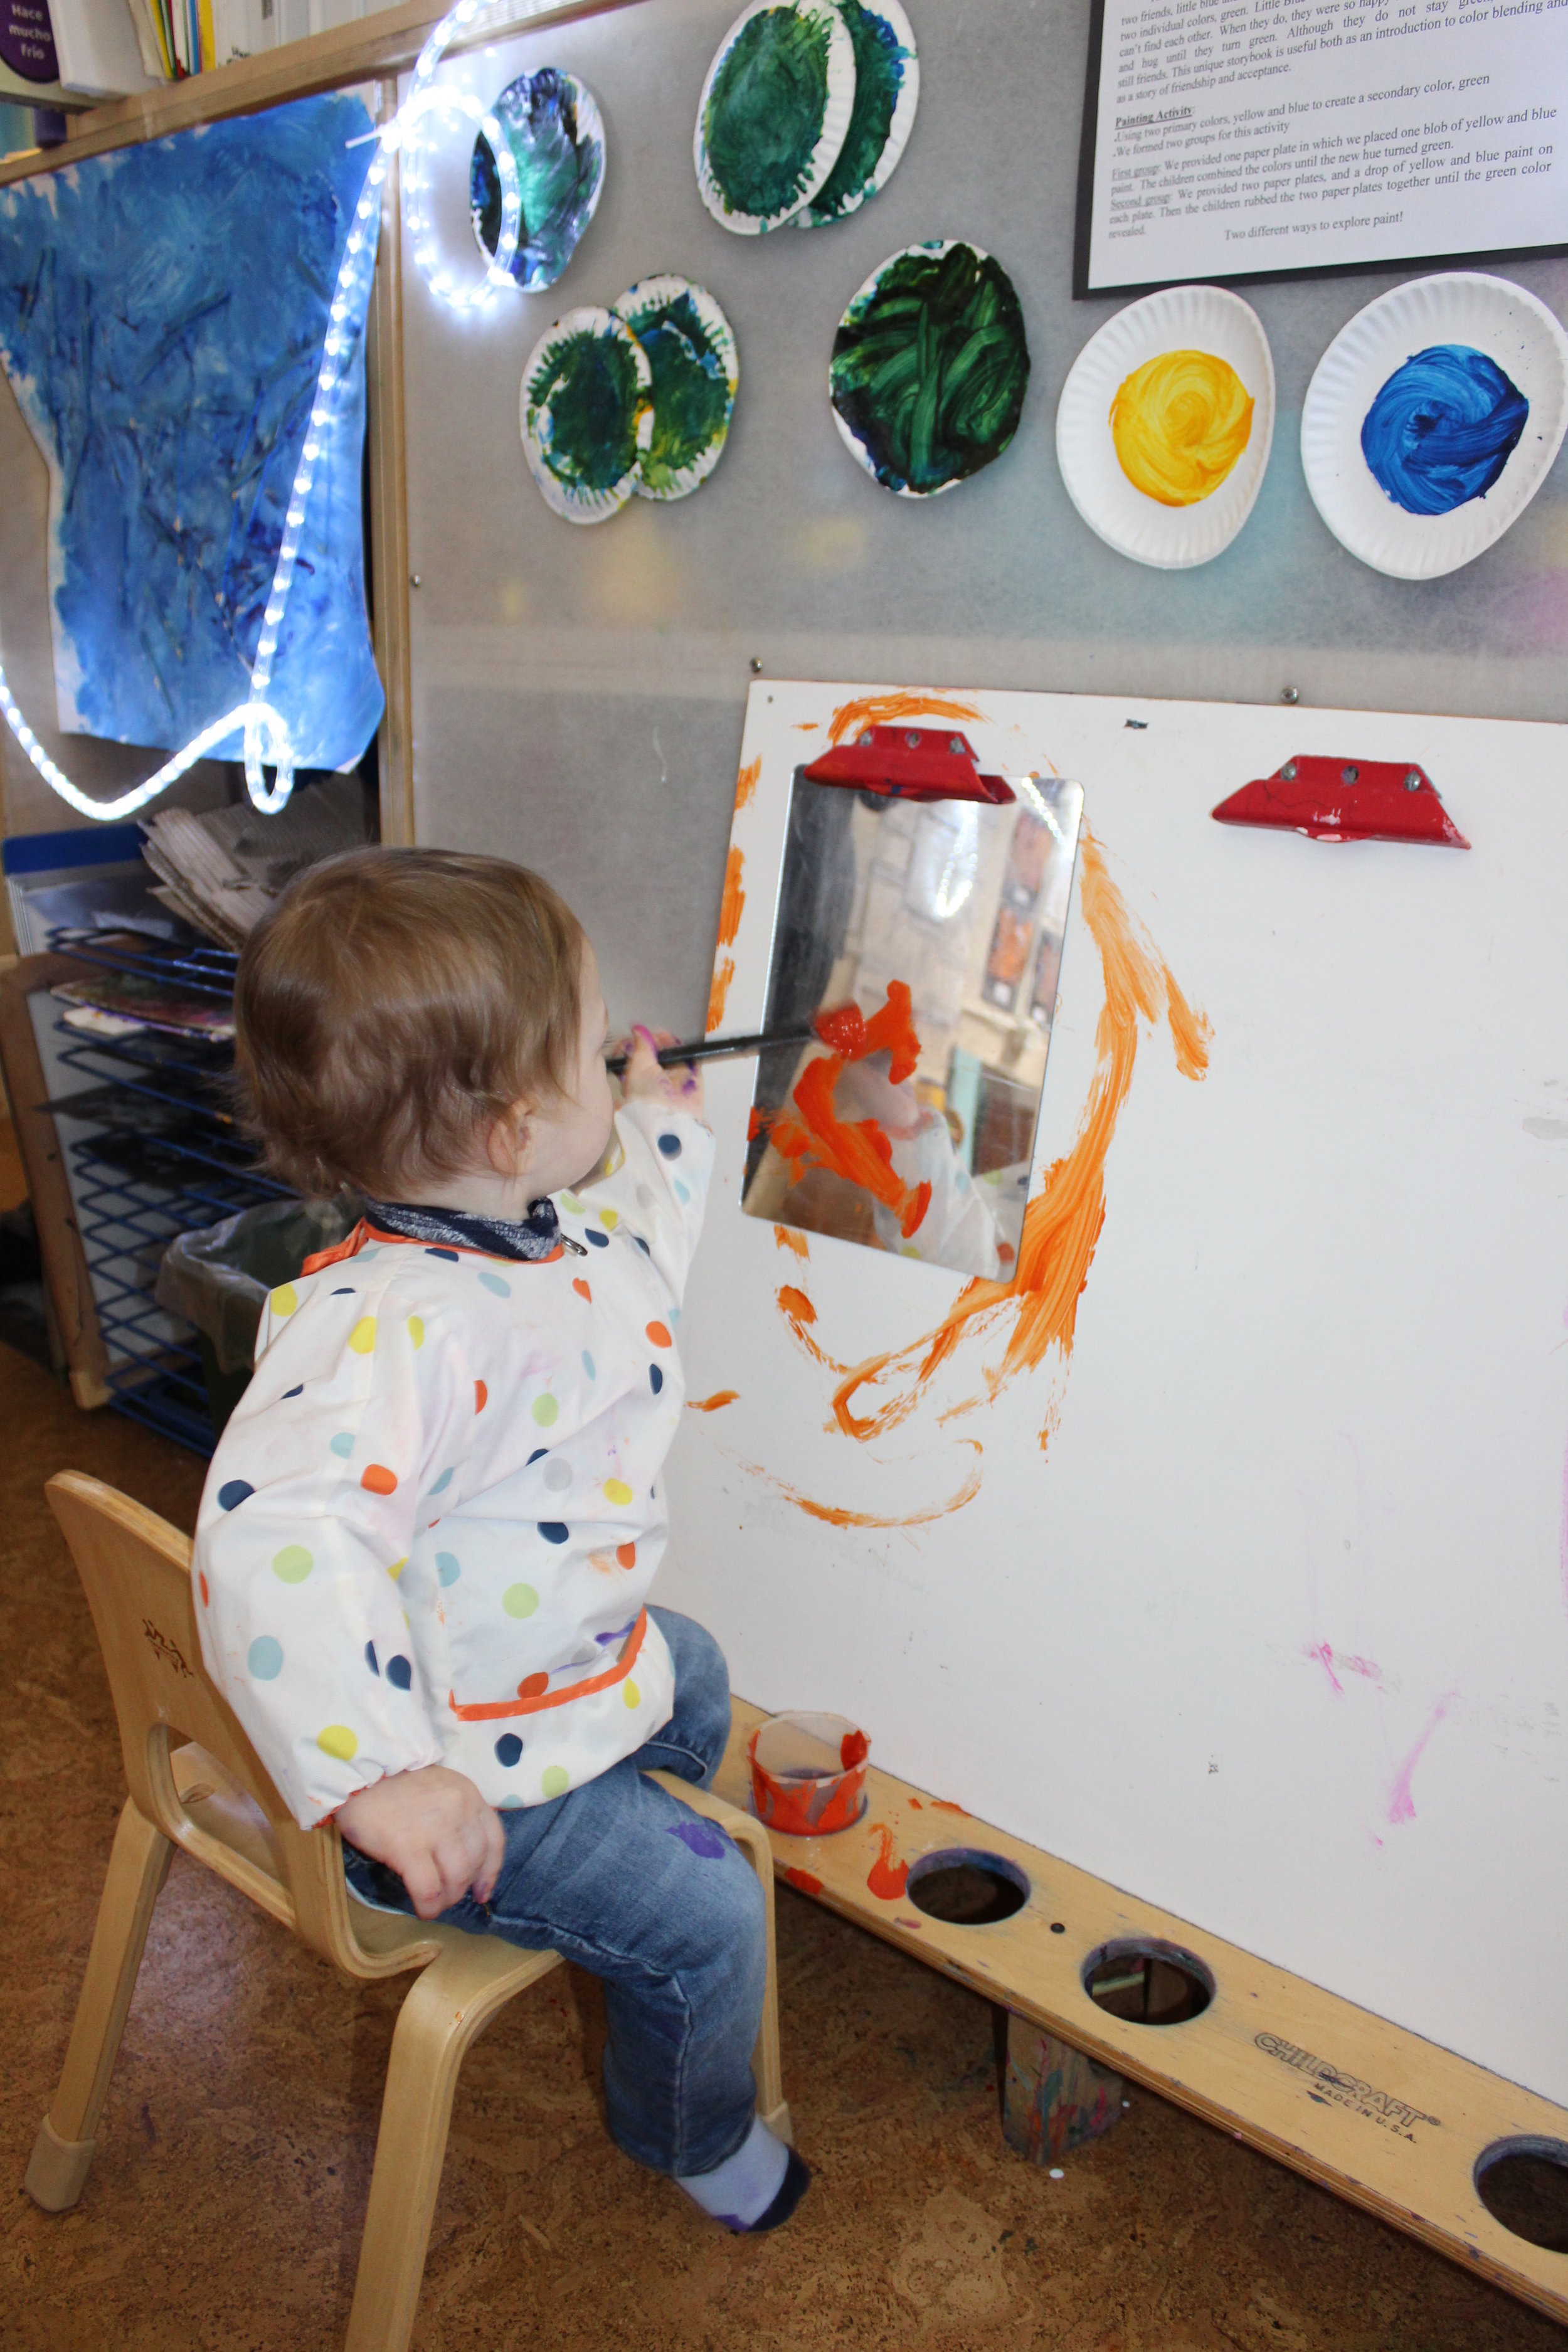  Grayson is feeling at ease in his classroom environment and interacting with different materials.&nbsp;&nbsp;     This fun activity helps children to experience a different form of painting on paper.&nbsp;It allows them to explore, experiment and di